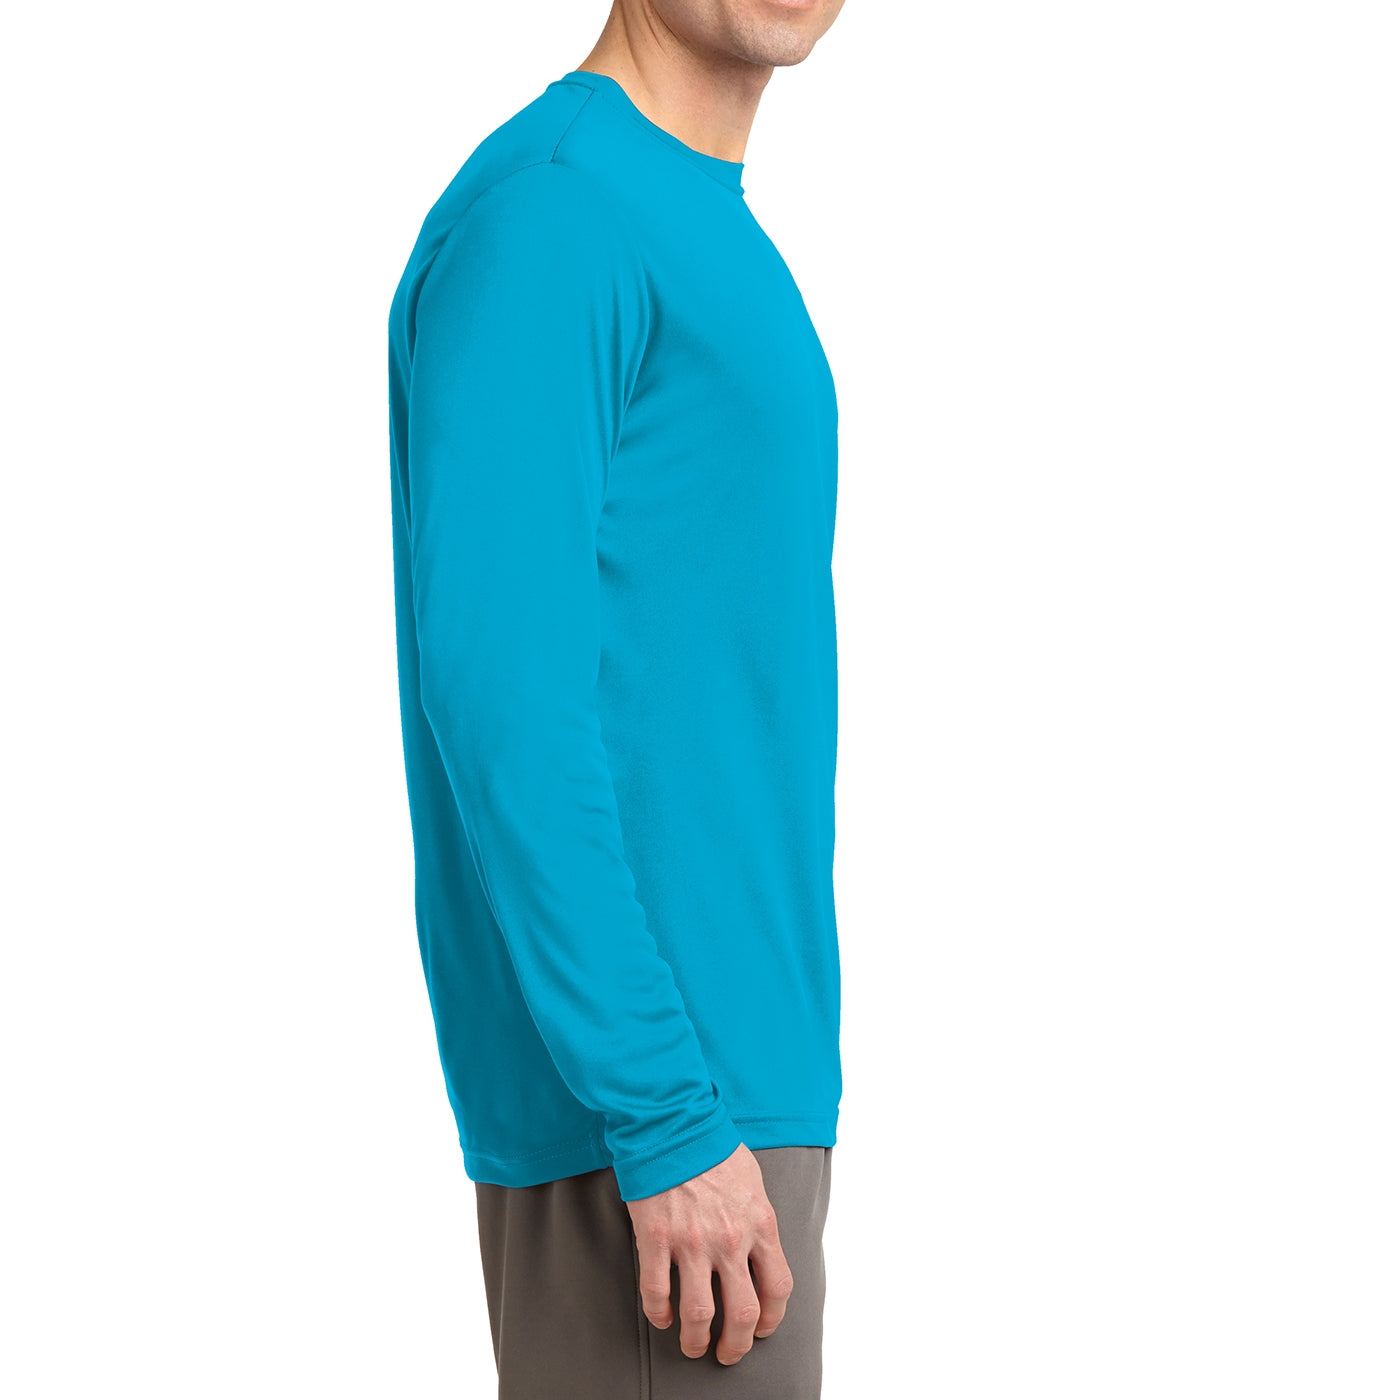 Men's Long Sleeve PosiCharge Competitor Tee - Atomic Blue